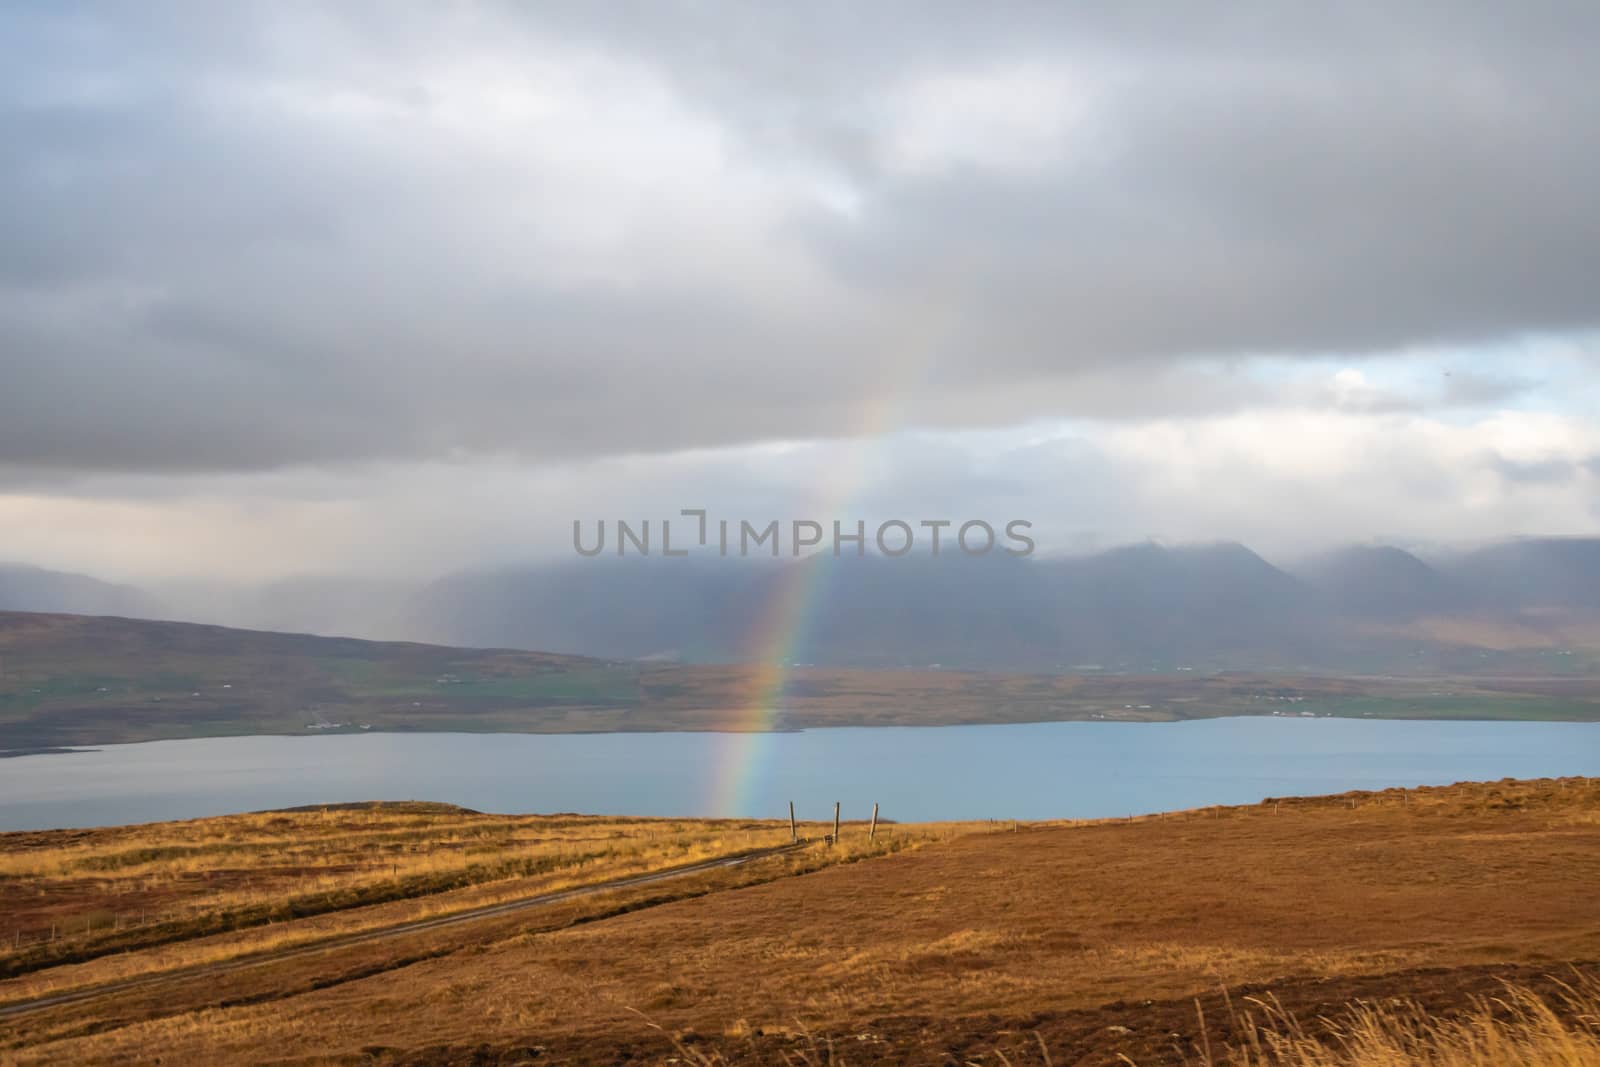 Mountain pass towards Akureyri in Iceland rainbow forming over the fjord